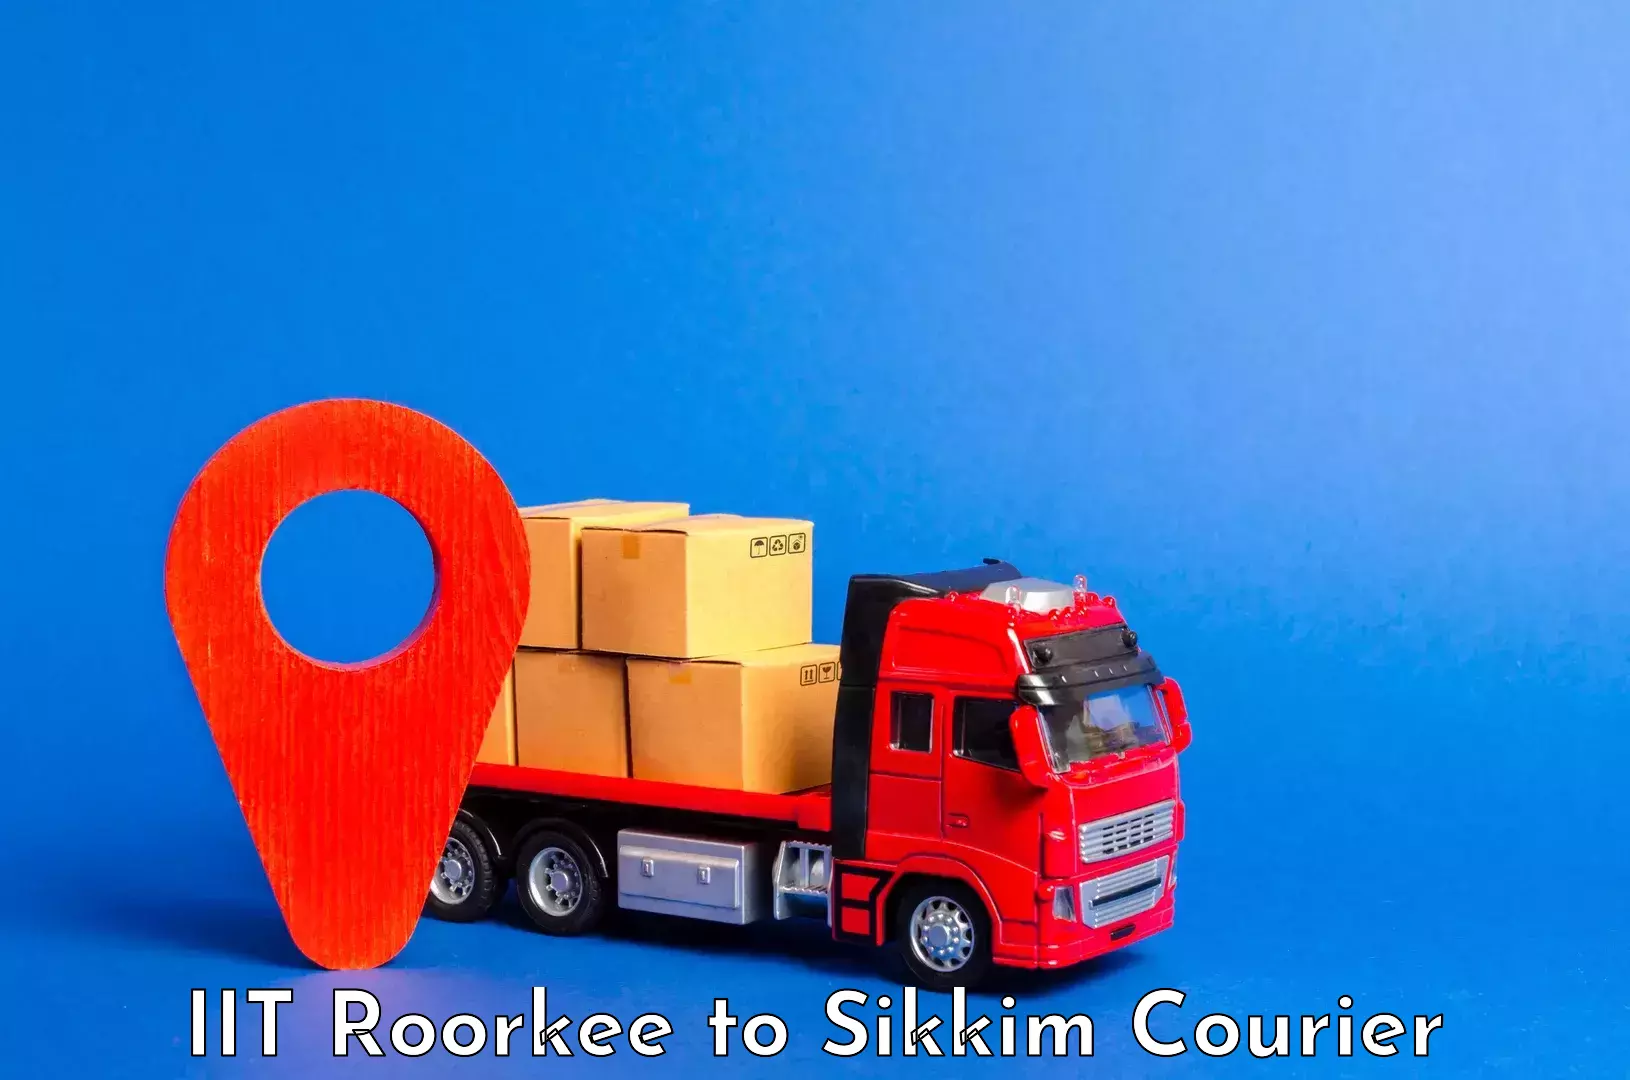 Luggage shipping service IIT Roorkee to North Sikkim